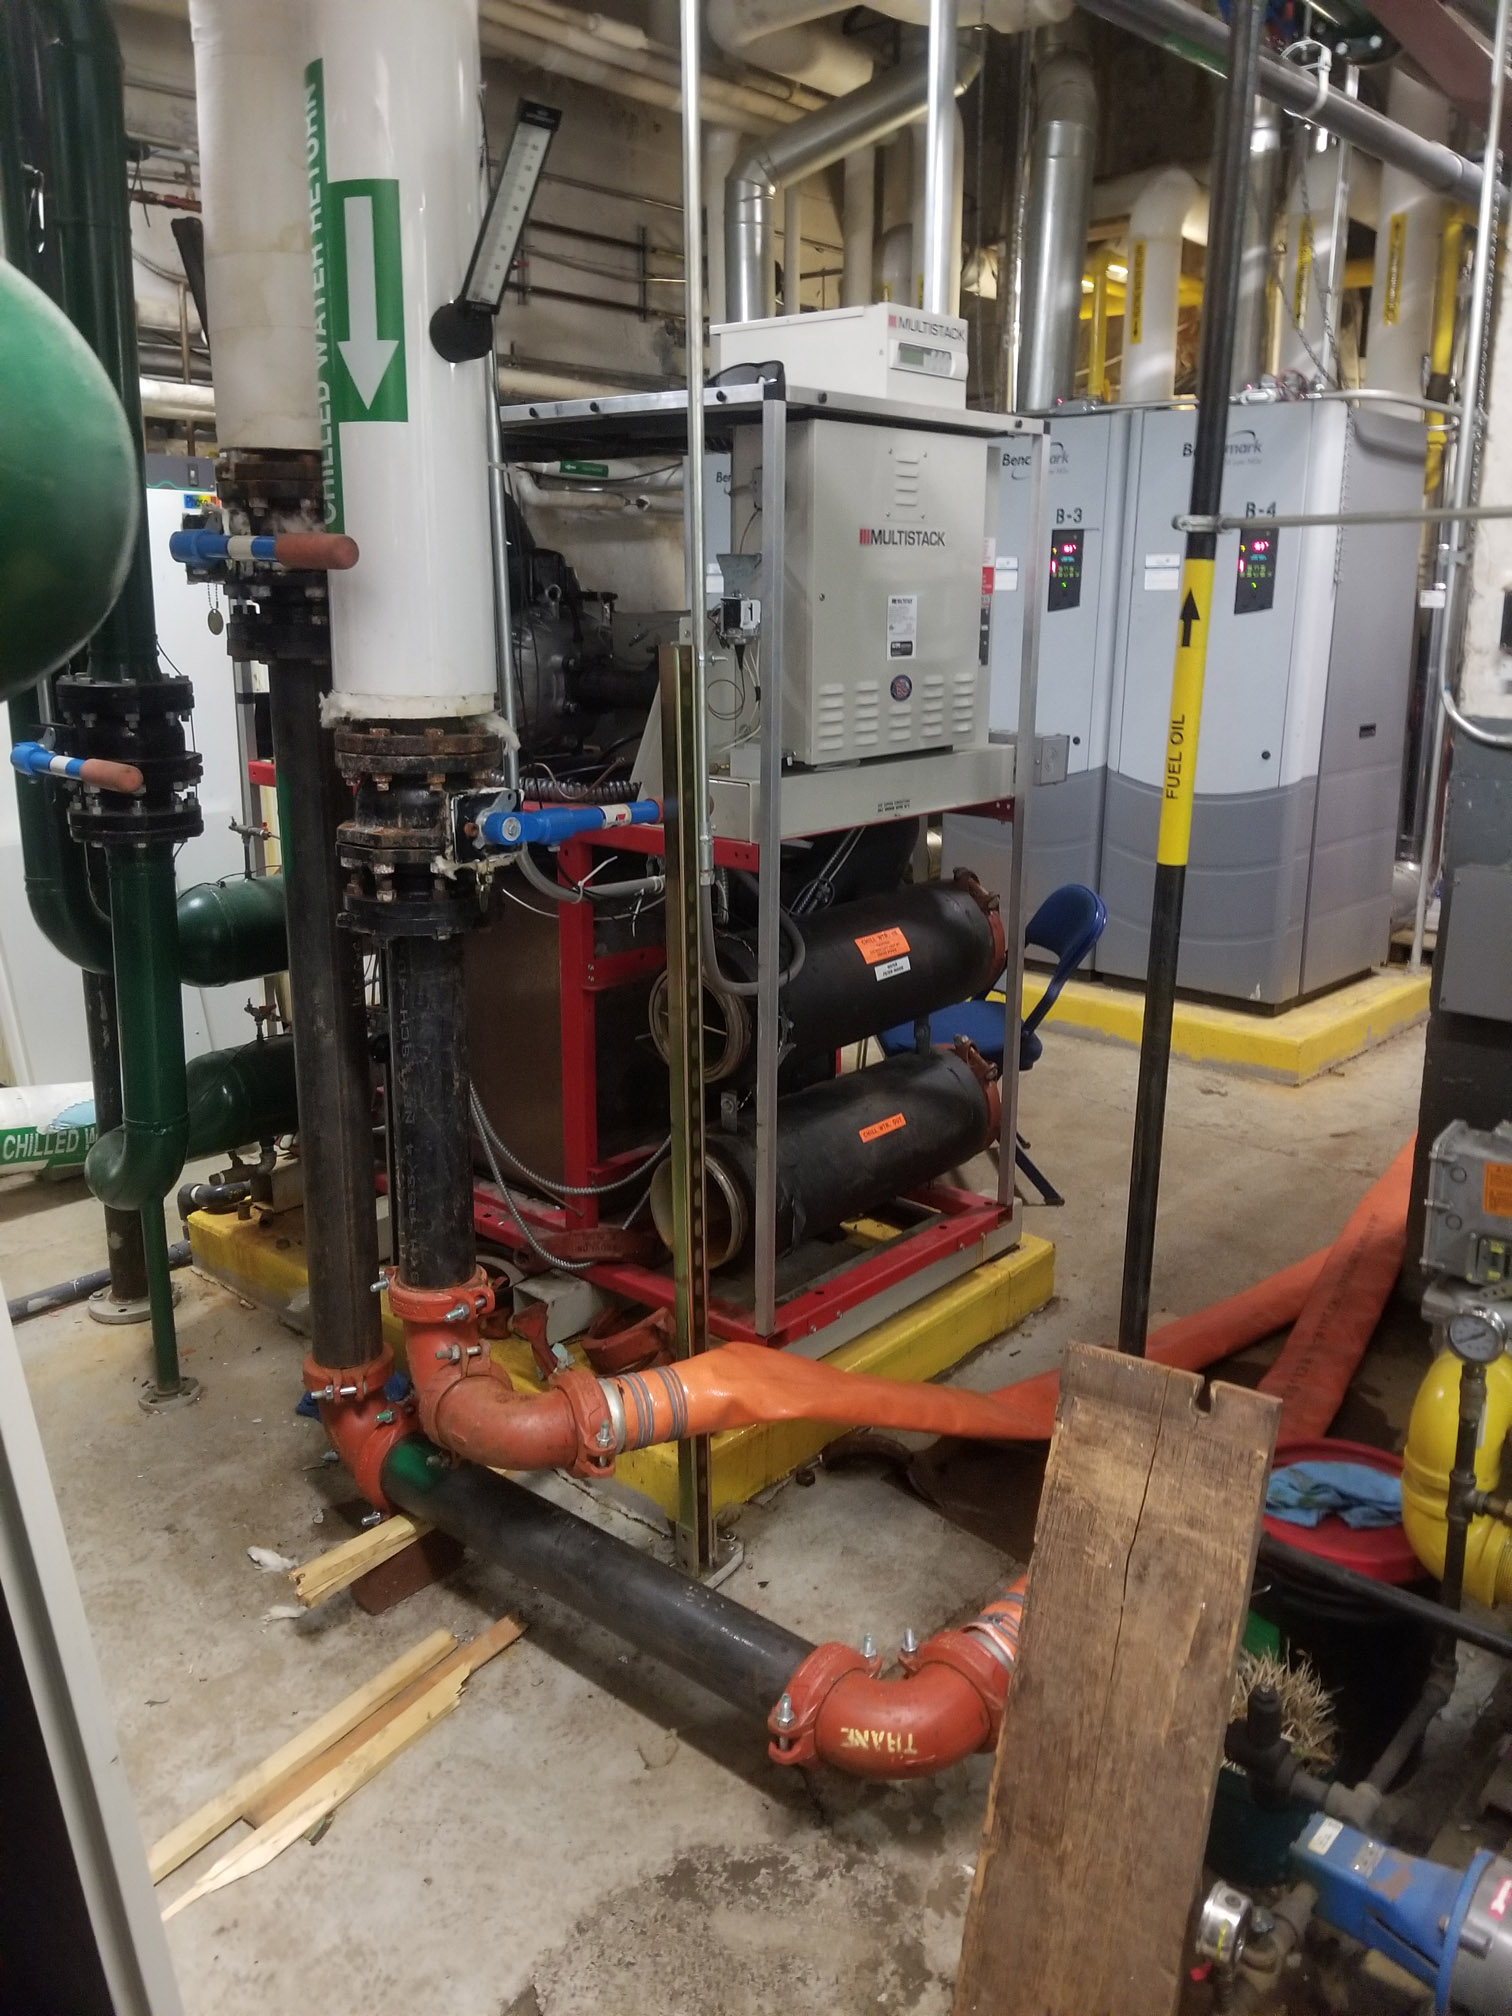 Air Cooled Chiller Rental Martin County FL, Chiller AC Rental Martin County FL, Temporary Chiller Martin County FL, Rental Chiller Installation Martin County FL